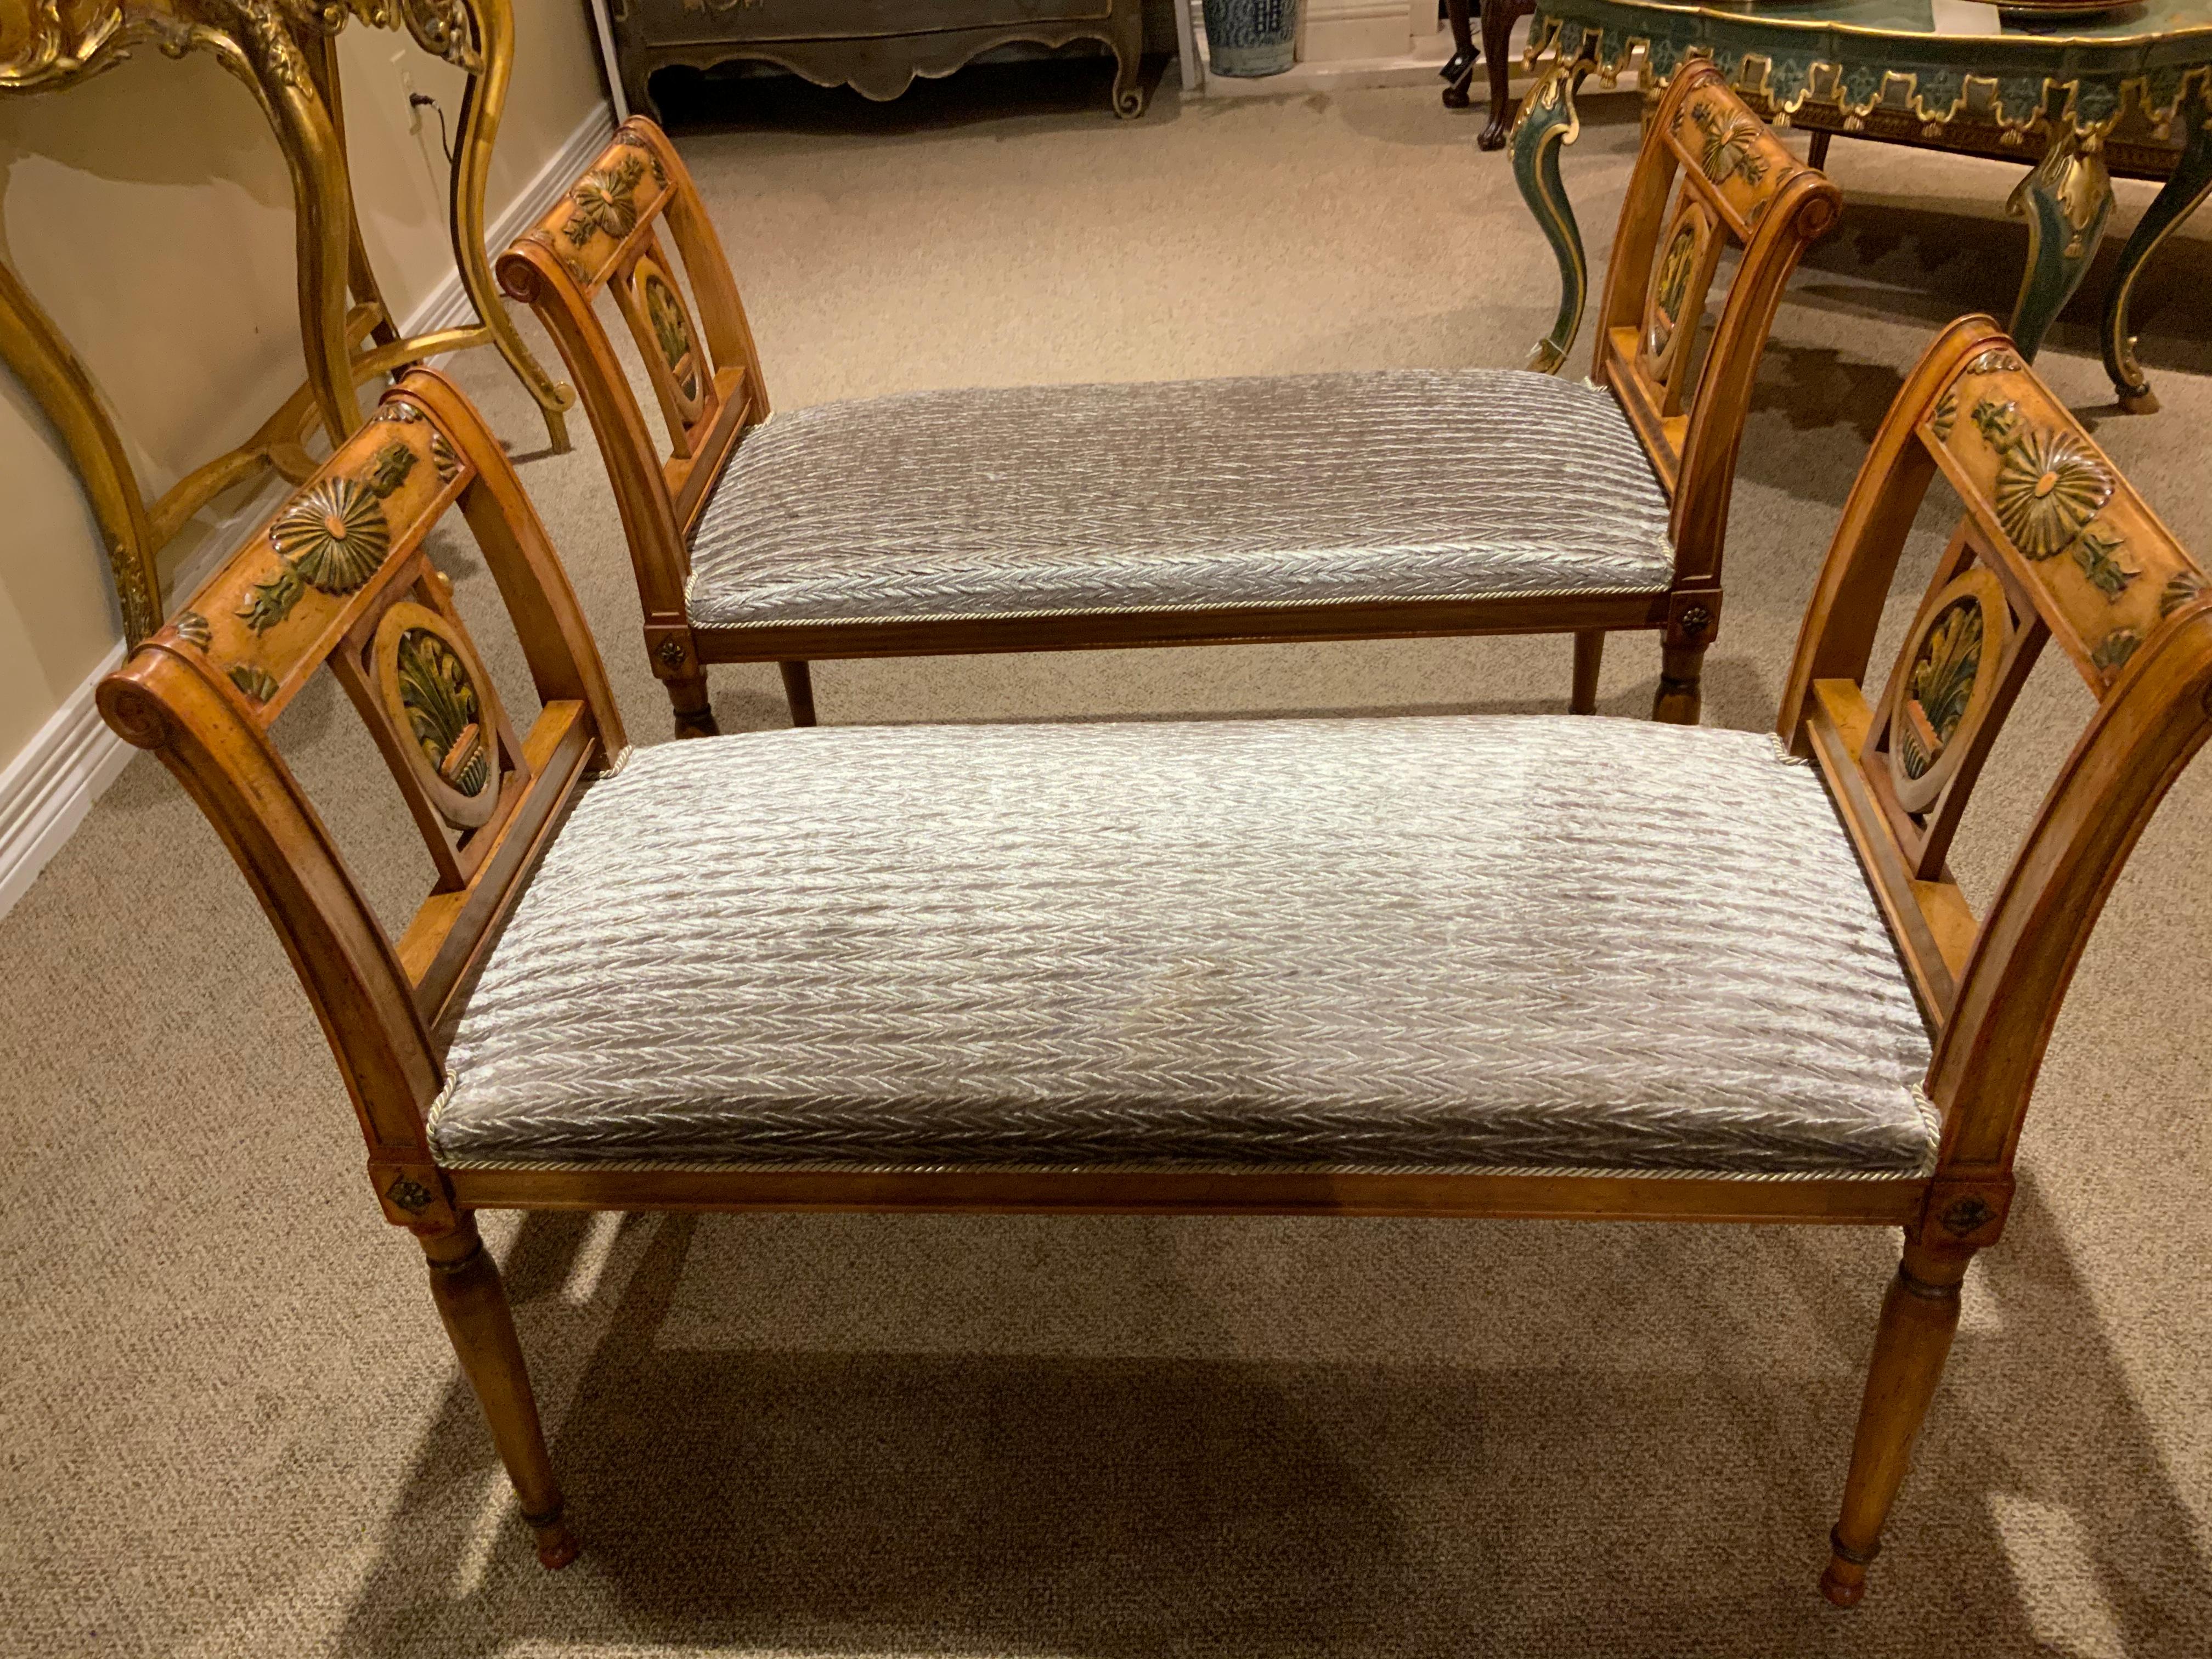 Pair of Italian Style Benches in a Honey Color with Painted Embellishments 1